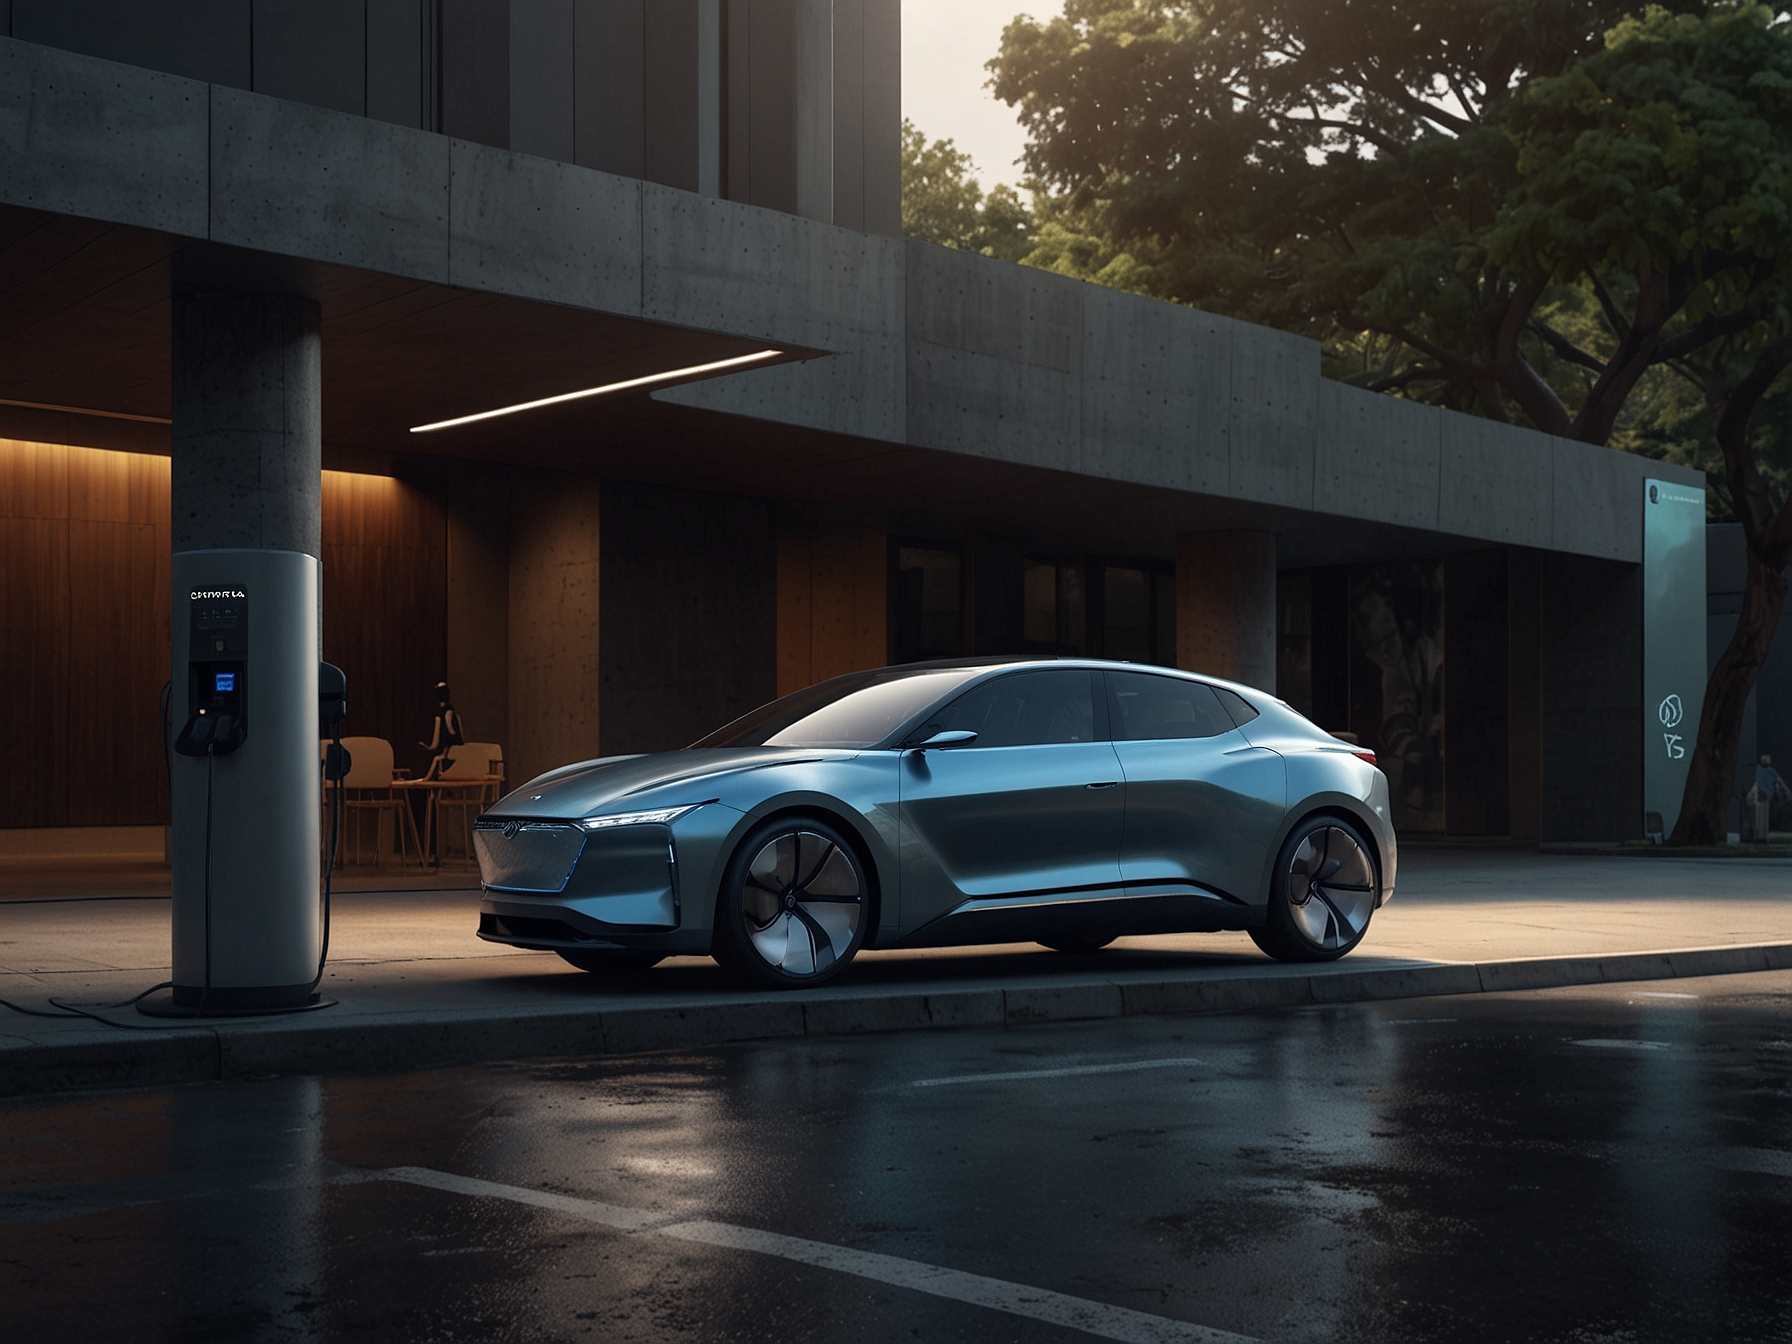 A futuristic Hyundai electric vehicle concept car beside a charging station, representing the company's strategic focus on EV technology and sustainable automotive advancements post-IPO.